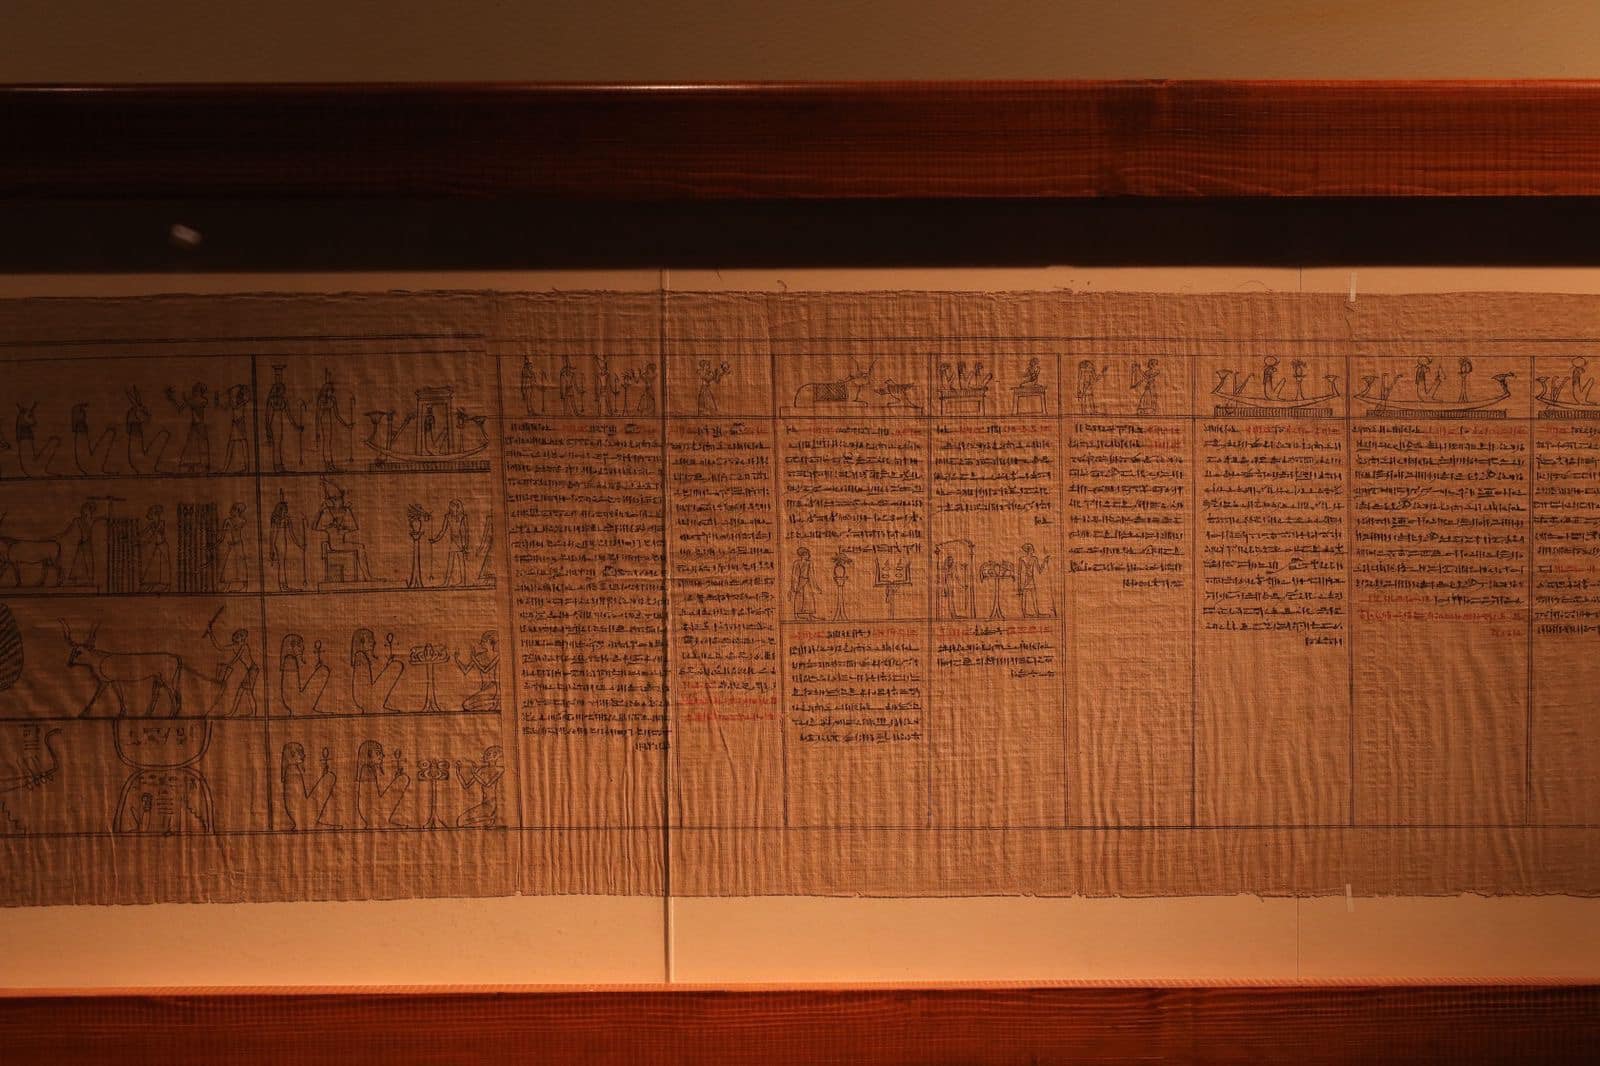 The 52-foot-long scroll was found at Saqqara in May 2022. It contains chapters from the Book of the Dead. It was recently restored and translated into Arabic and is now on display at The Egyptian Museum in Cairo. The text is written in hieratic, a script derived from hieroglyphs. Here images and texts can be seen.